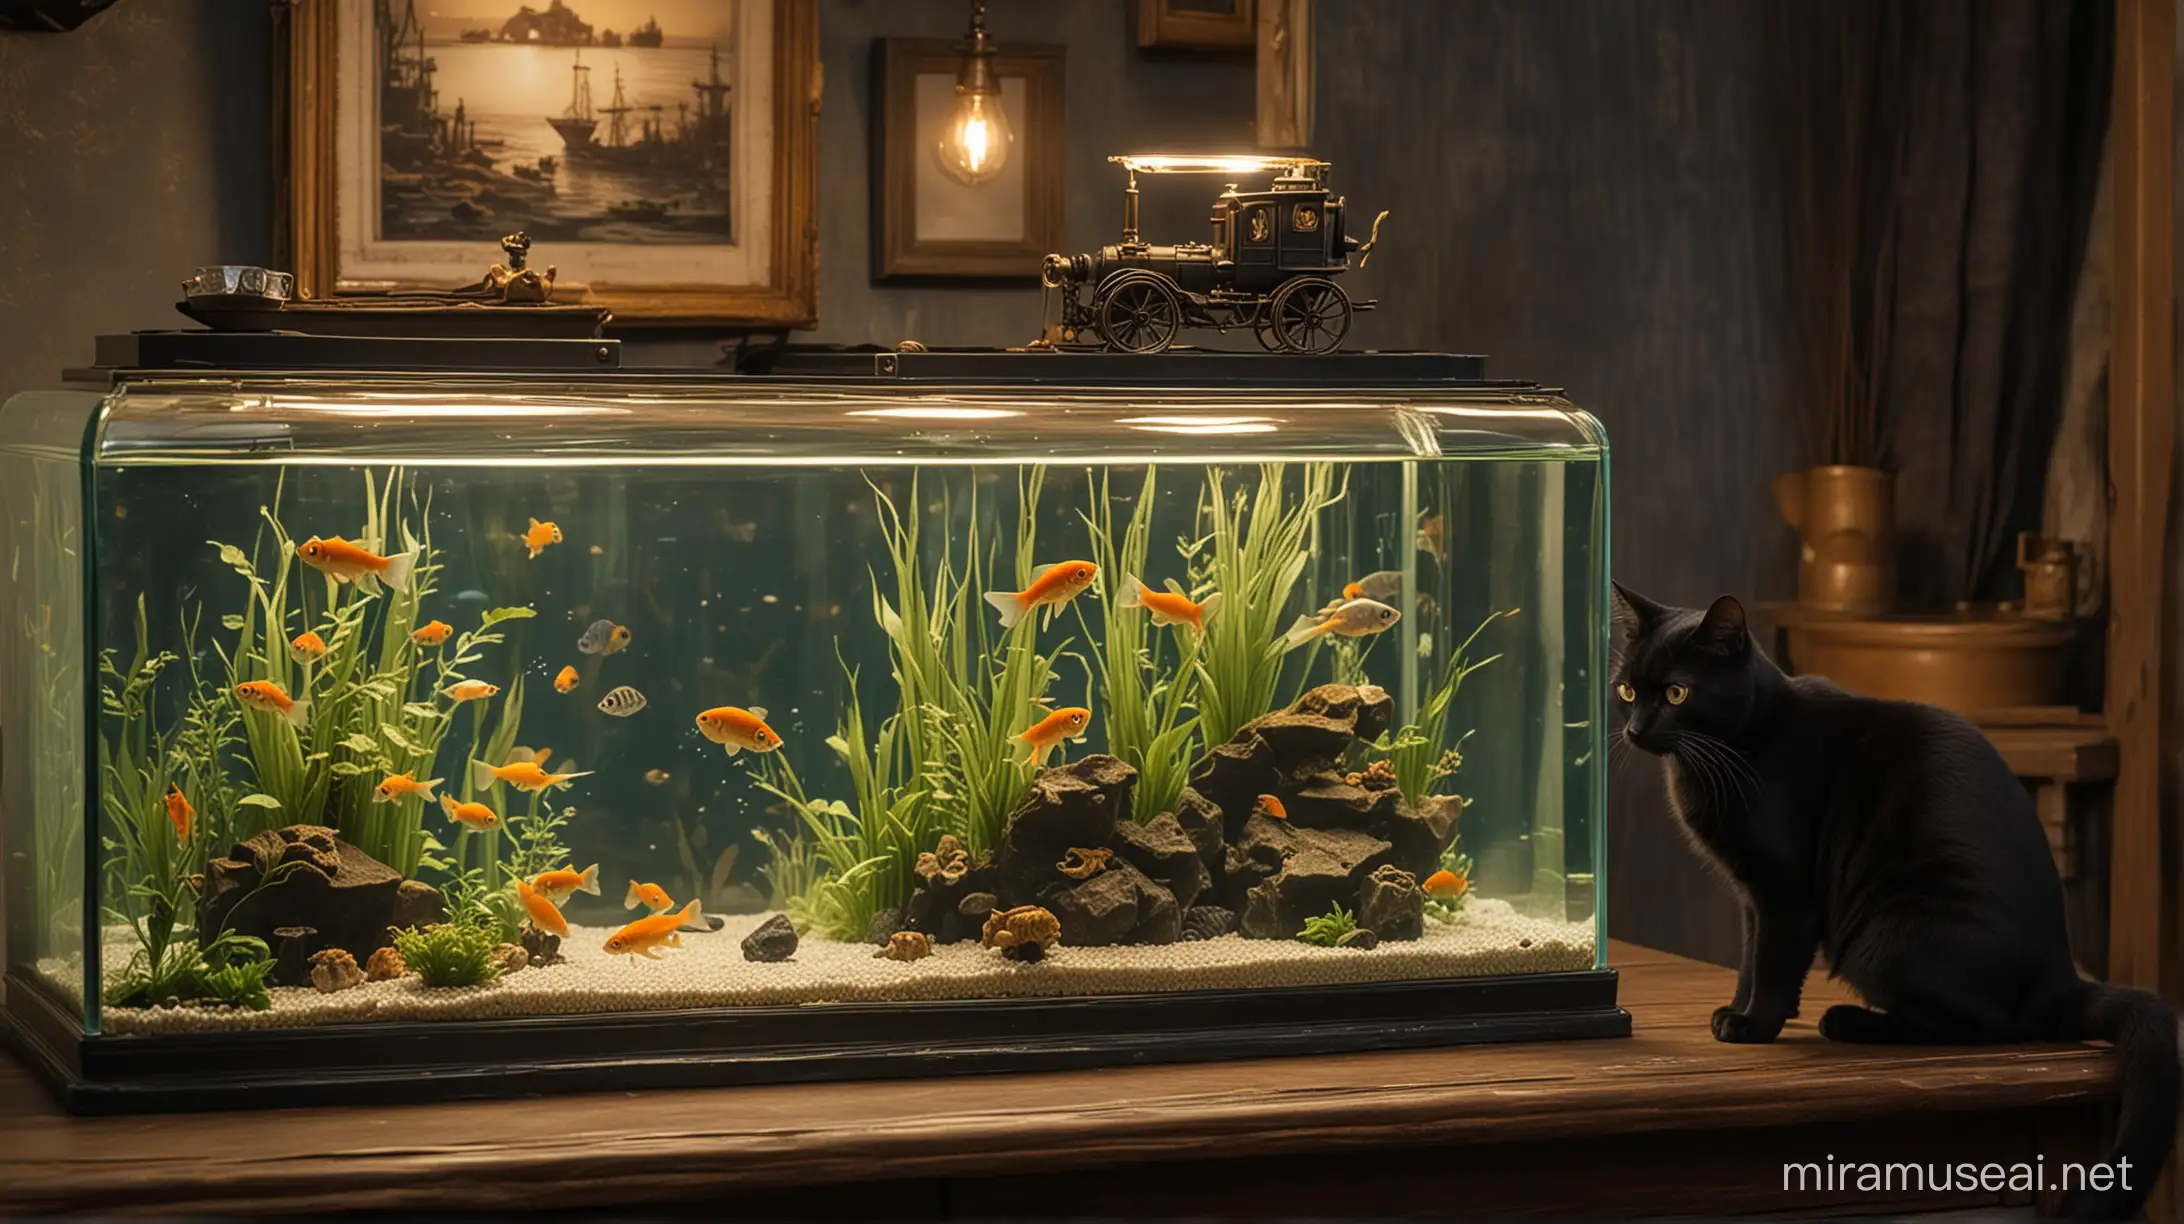 Orange and Black Cats Watching Golden Fish in Steampunk Living Room